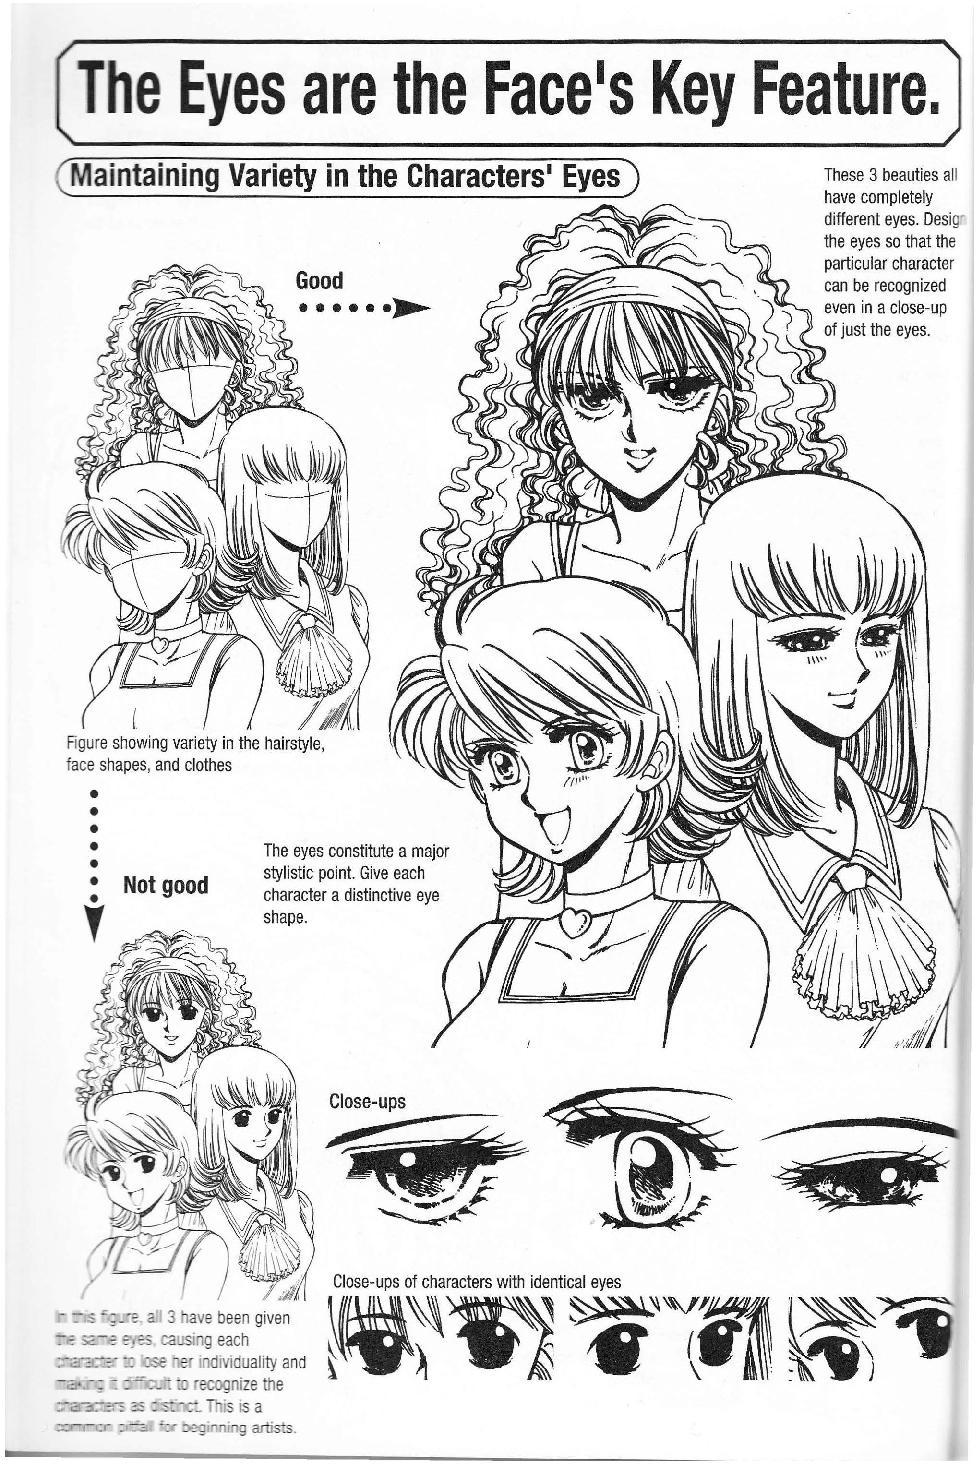 More How to Draw Manga Vol. 2 - Penning Characters 45